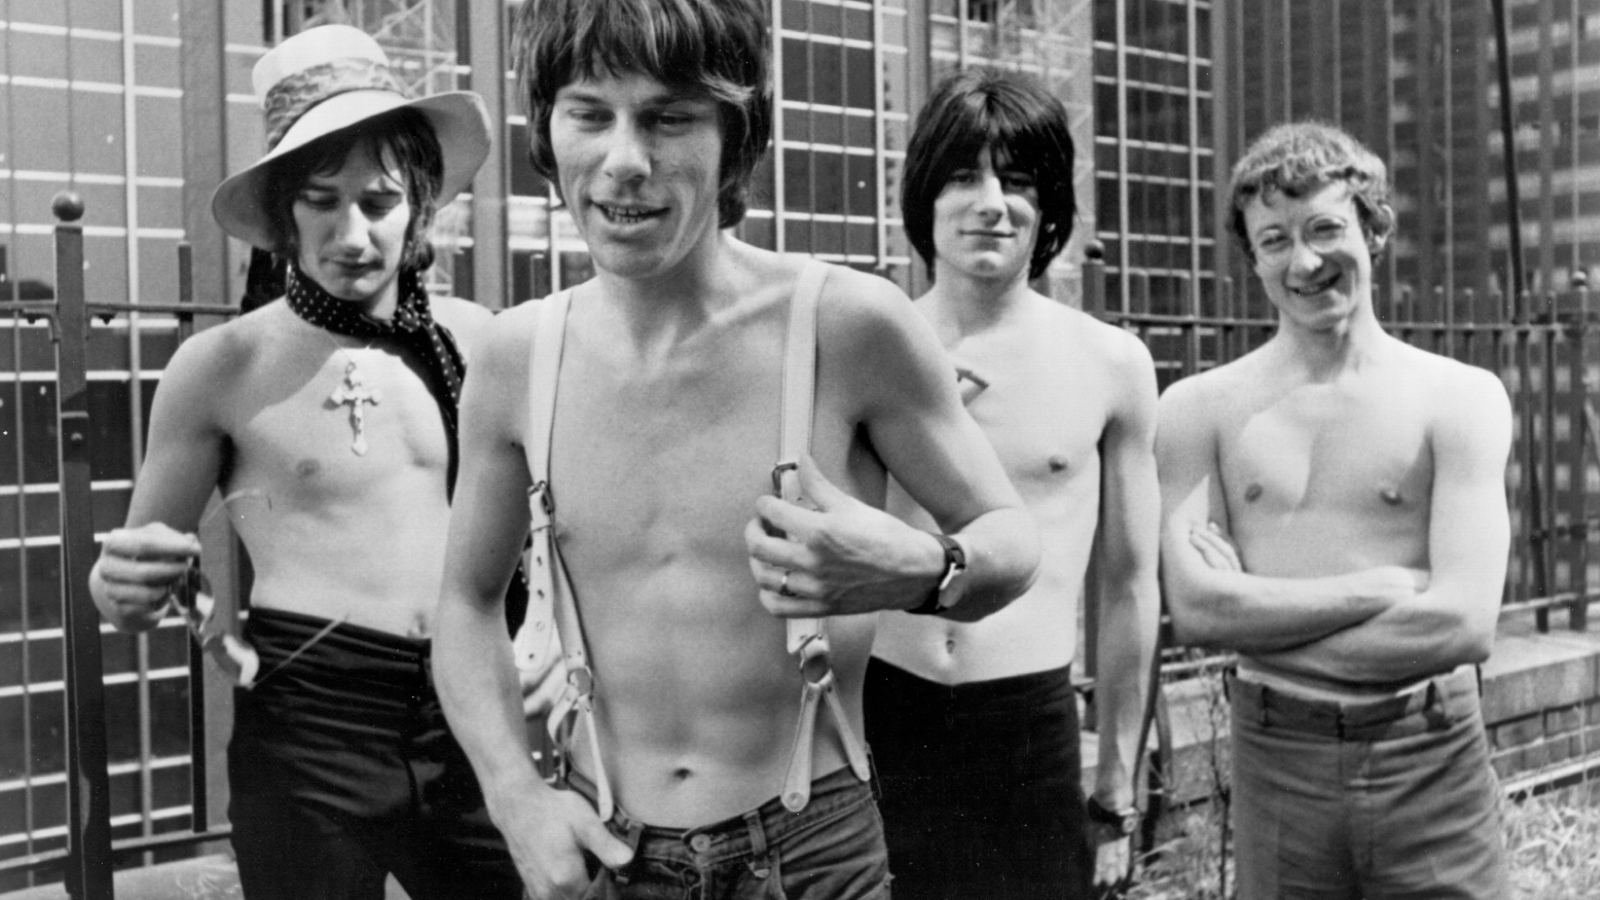 I'd Lost My Girl, Hendrix Had Come and Smeared Everybody Across the Floor…  It Wasn't Looking Too Rosy”: In 1968, Jeff Beck Found Success on His Own  Terms With His Own Group